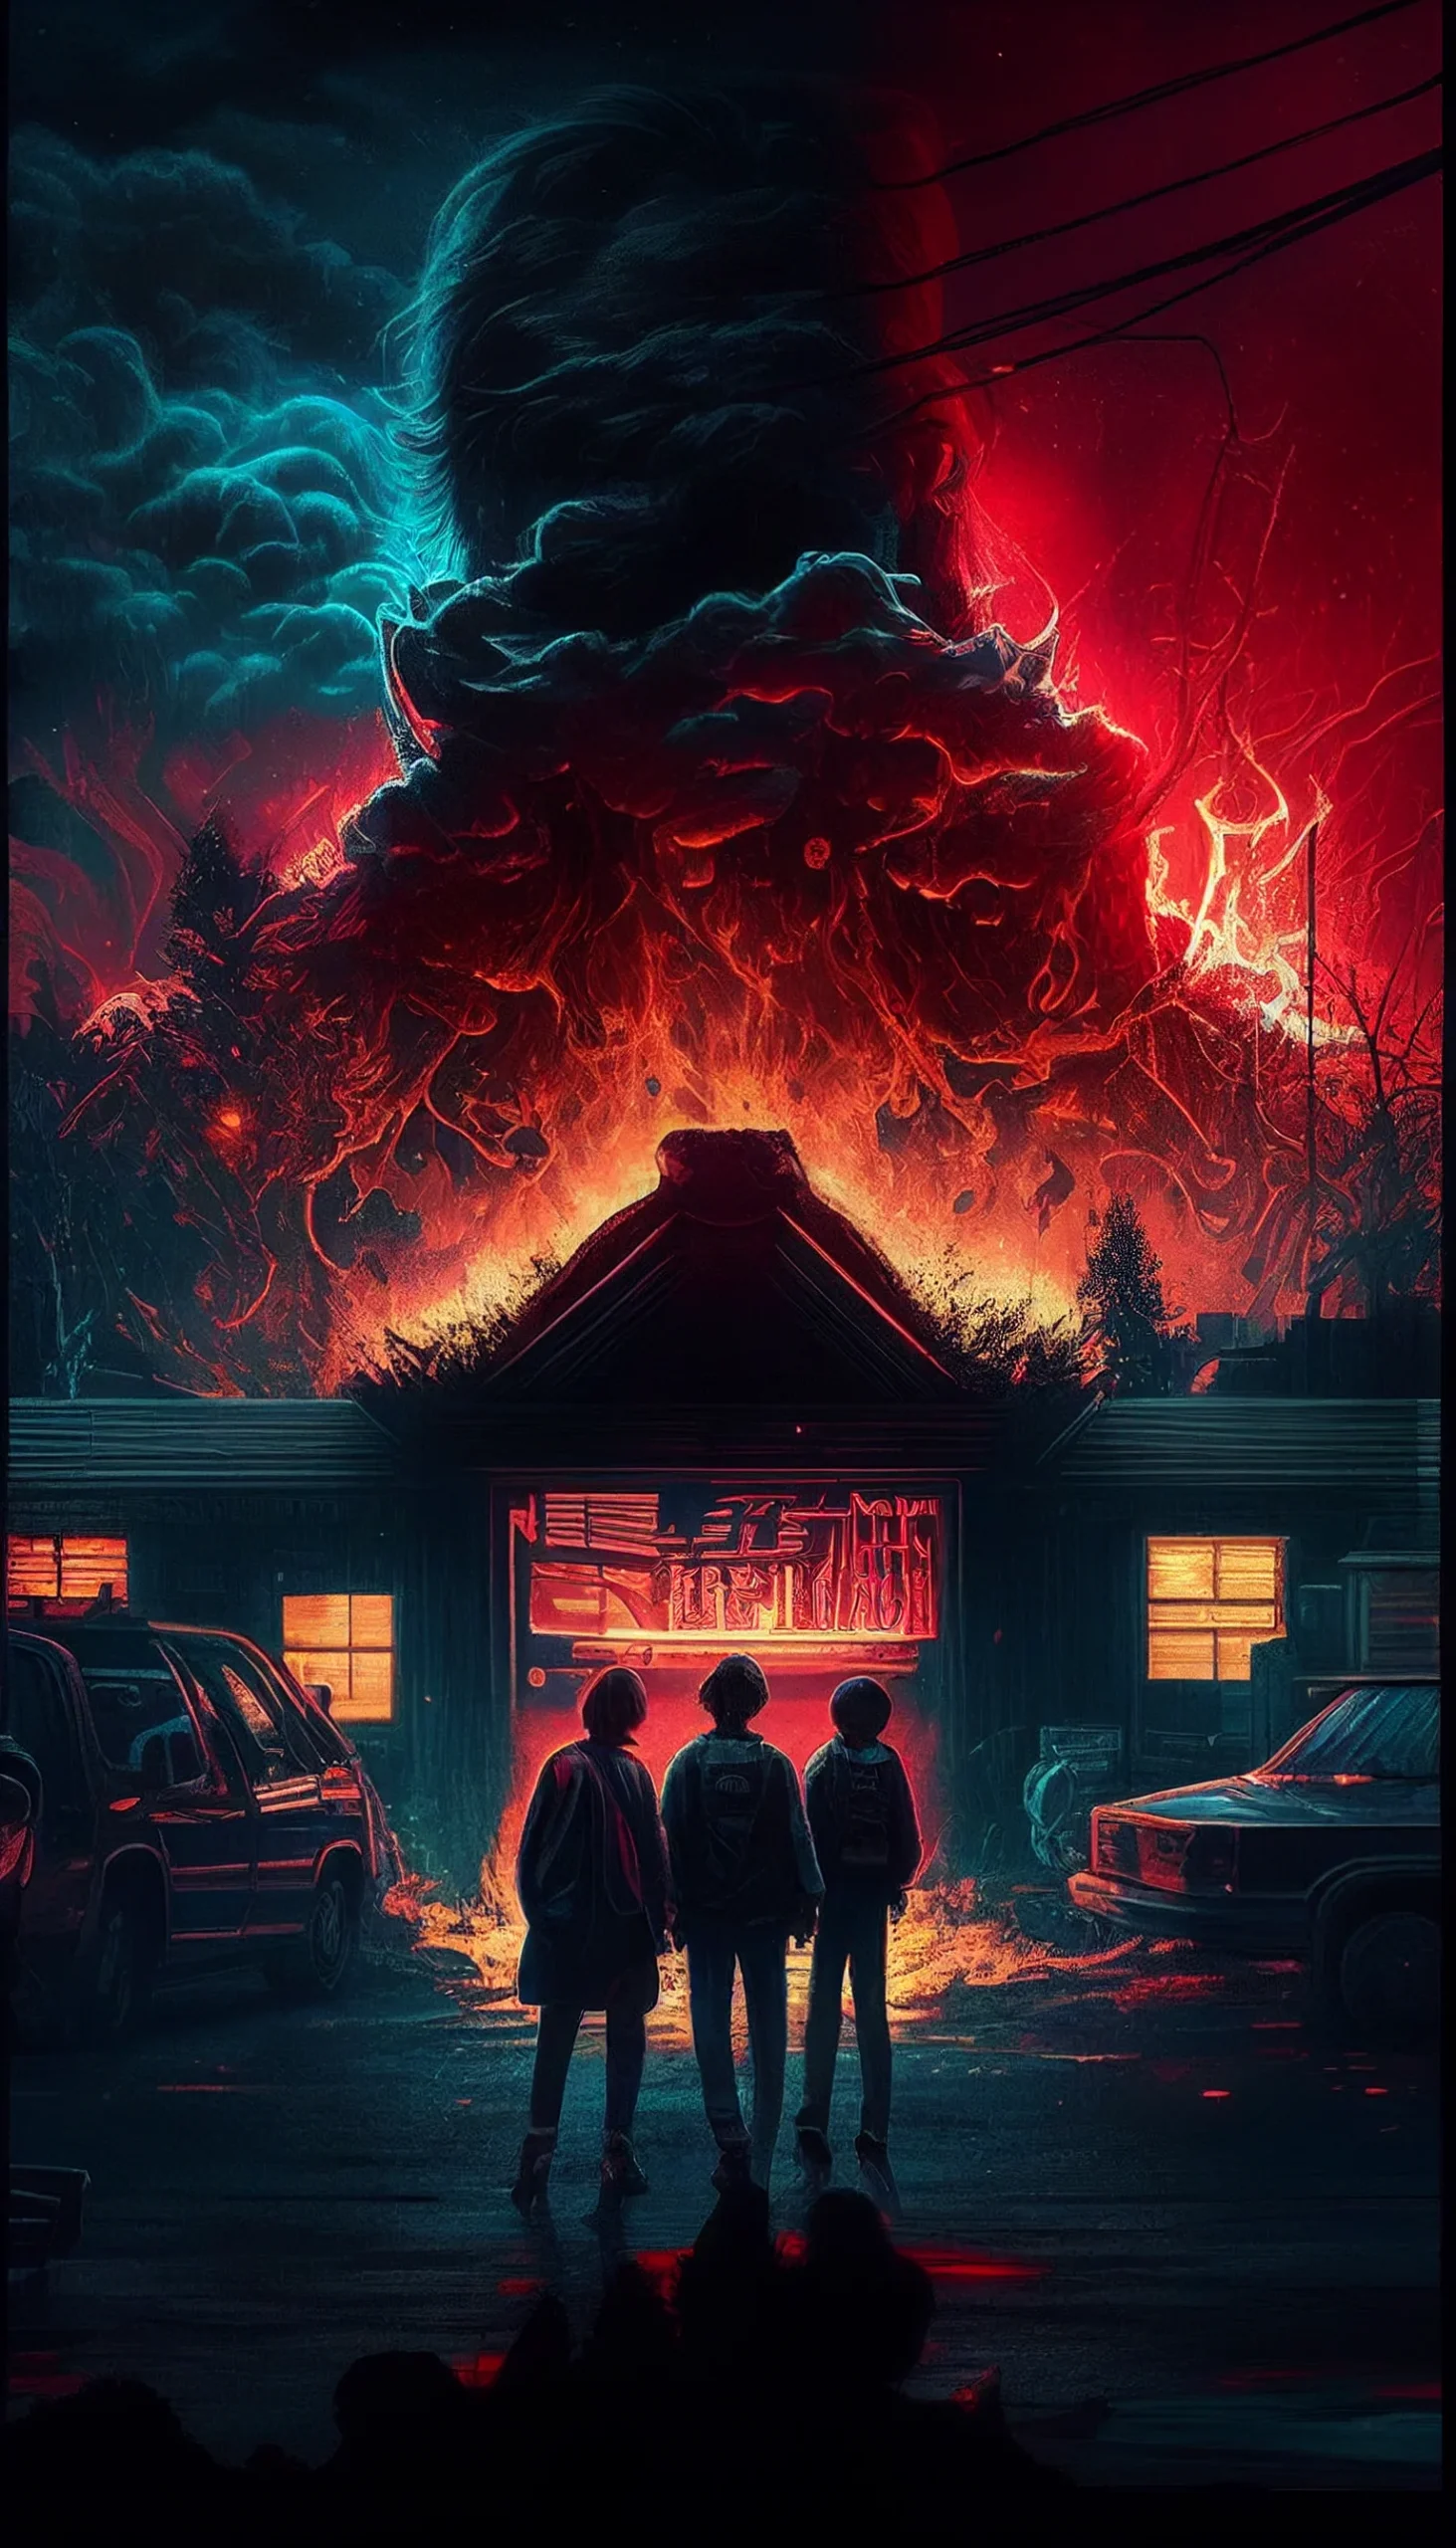 Stranger Things 3 wallpaper for iPhone and Android devices. - Stranger Things